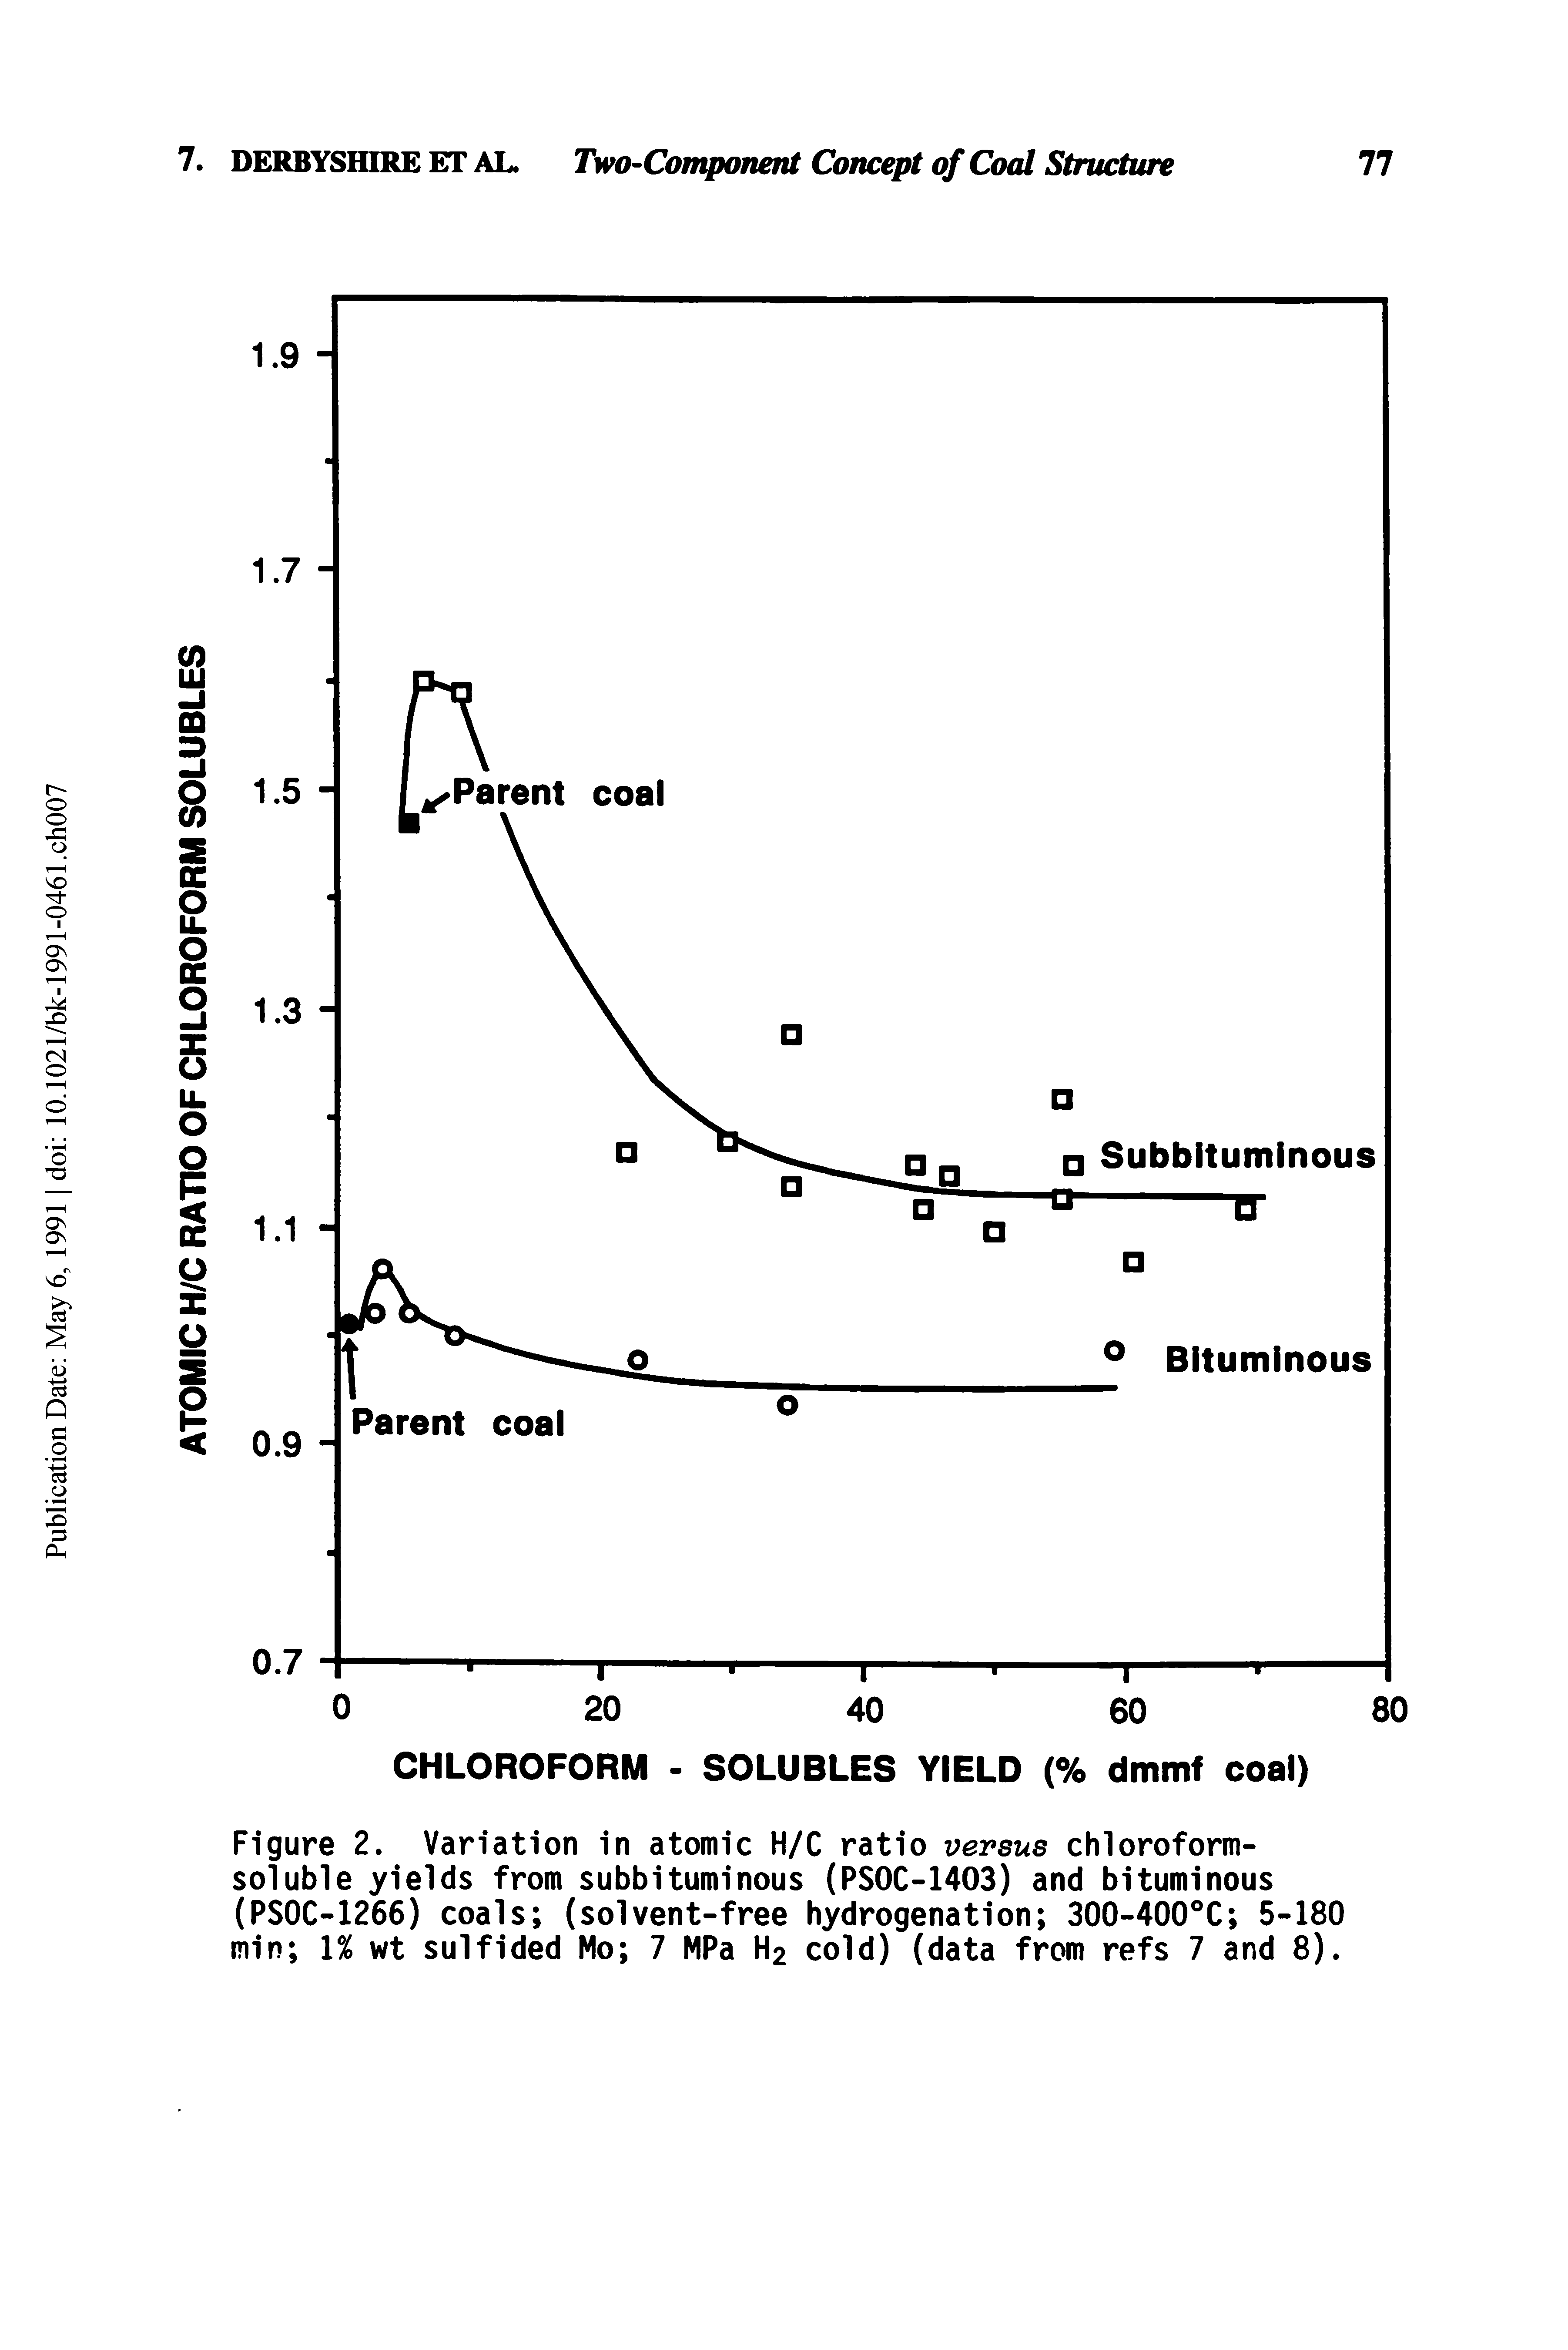 Figure 2. Variation in atomic H/C ratio versus chloroform-soluble yields from subbituminous (PSOC-1403) and bituminous (PSOC-1266) coals (solvent-free hydrogenation 300-400°C 5-180 min 1% wt sulfided Mo 7 MPa H2 cold) (data from refs 7 and 8).